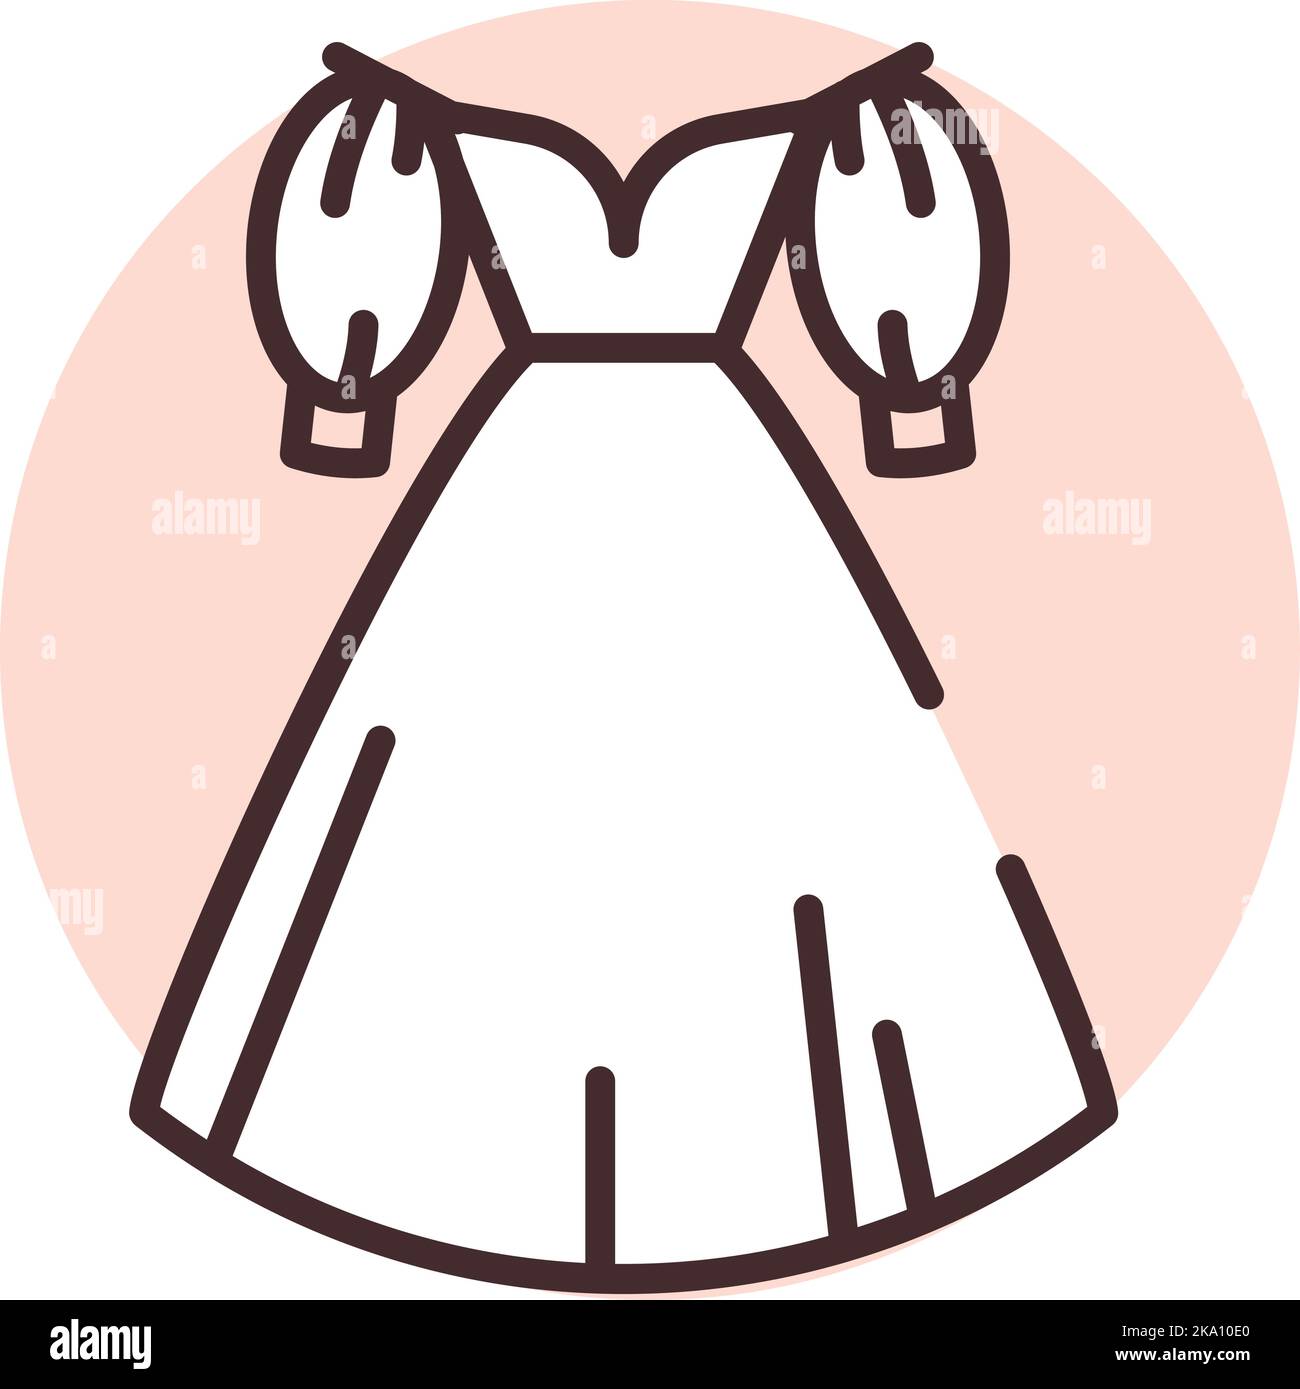 Event white wedding dress, illustration or icon, vector on white background. Stock Vector